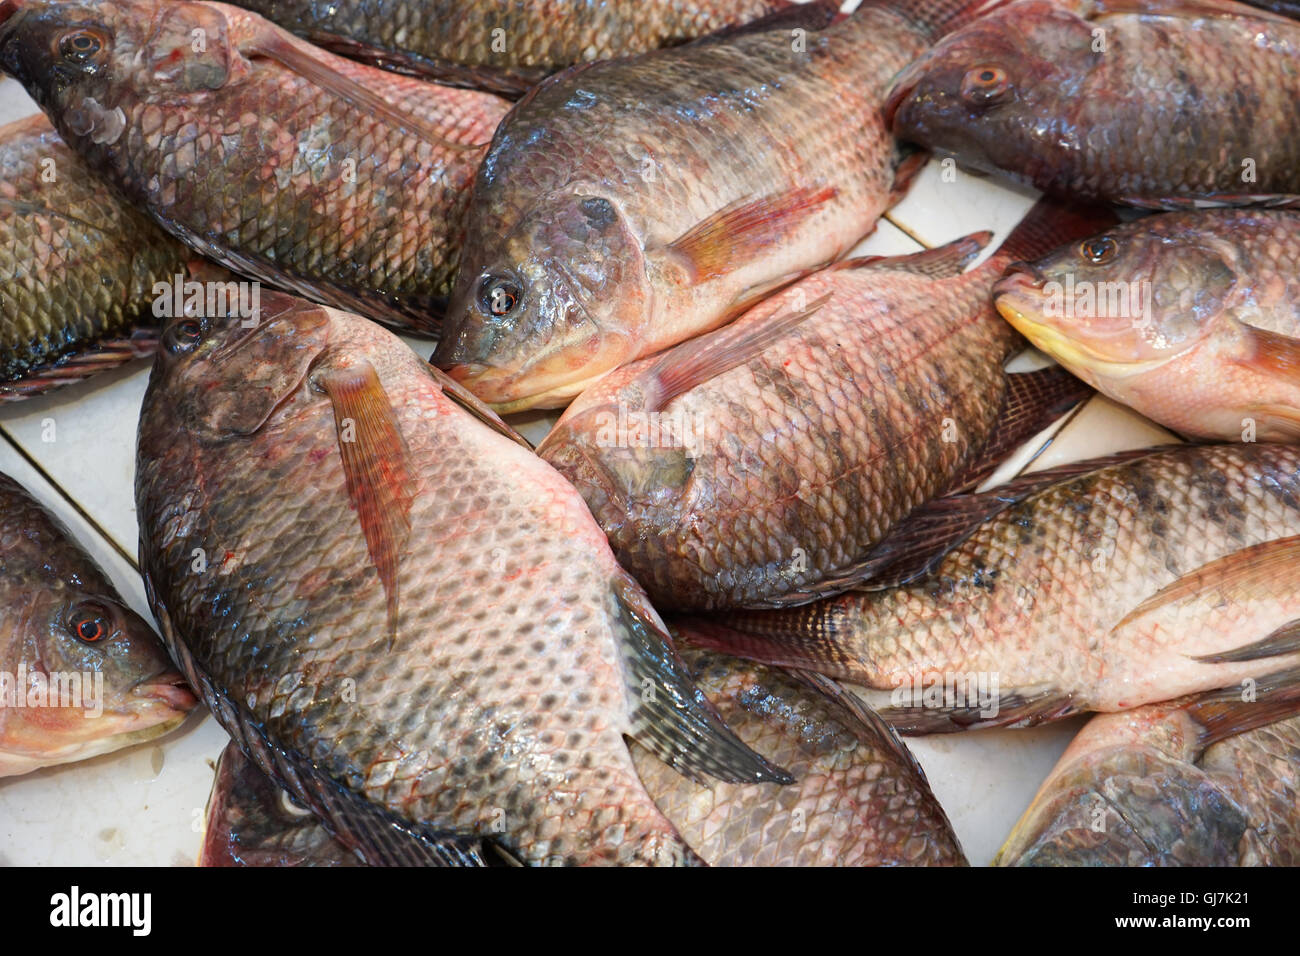 tilapia fishes in the market Stock Photo